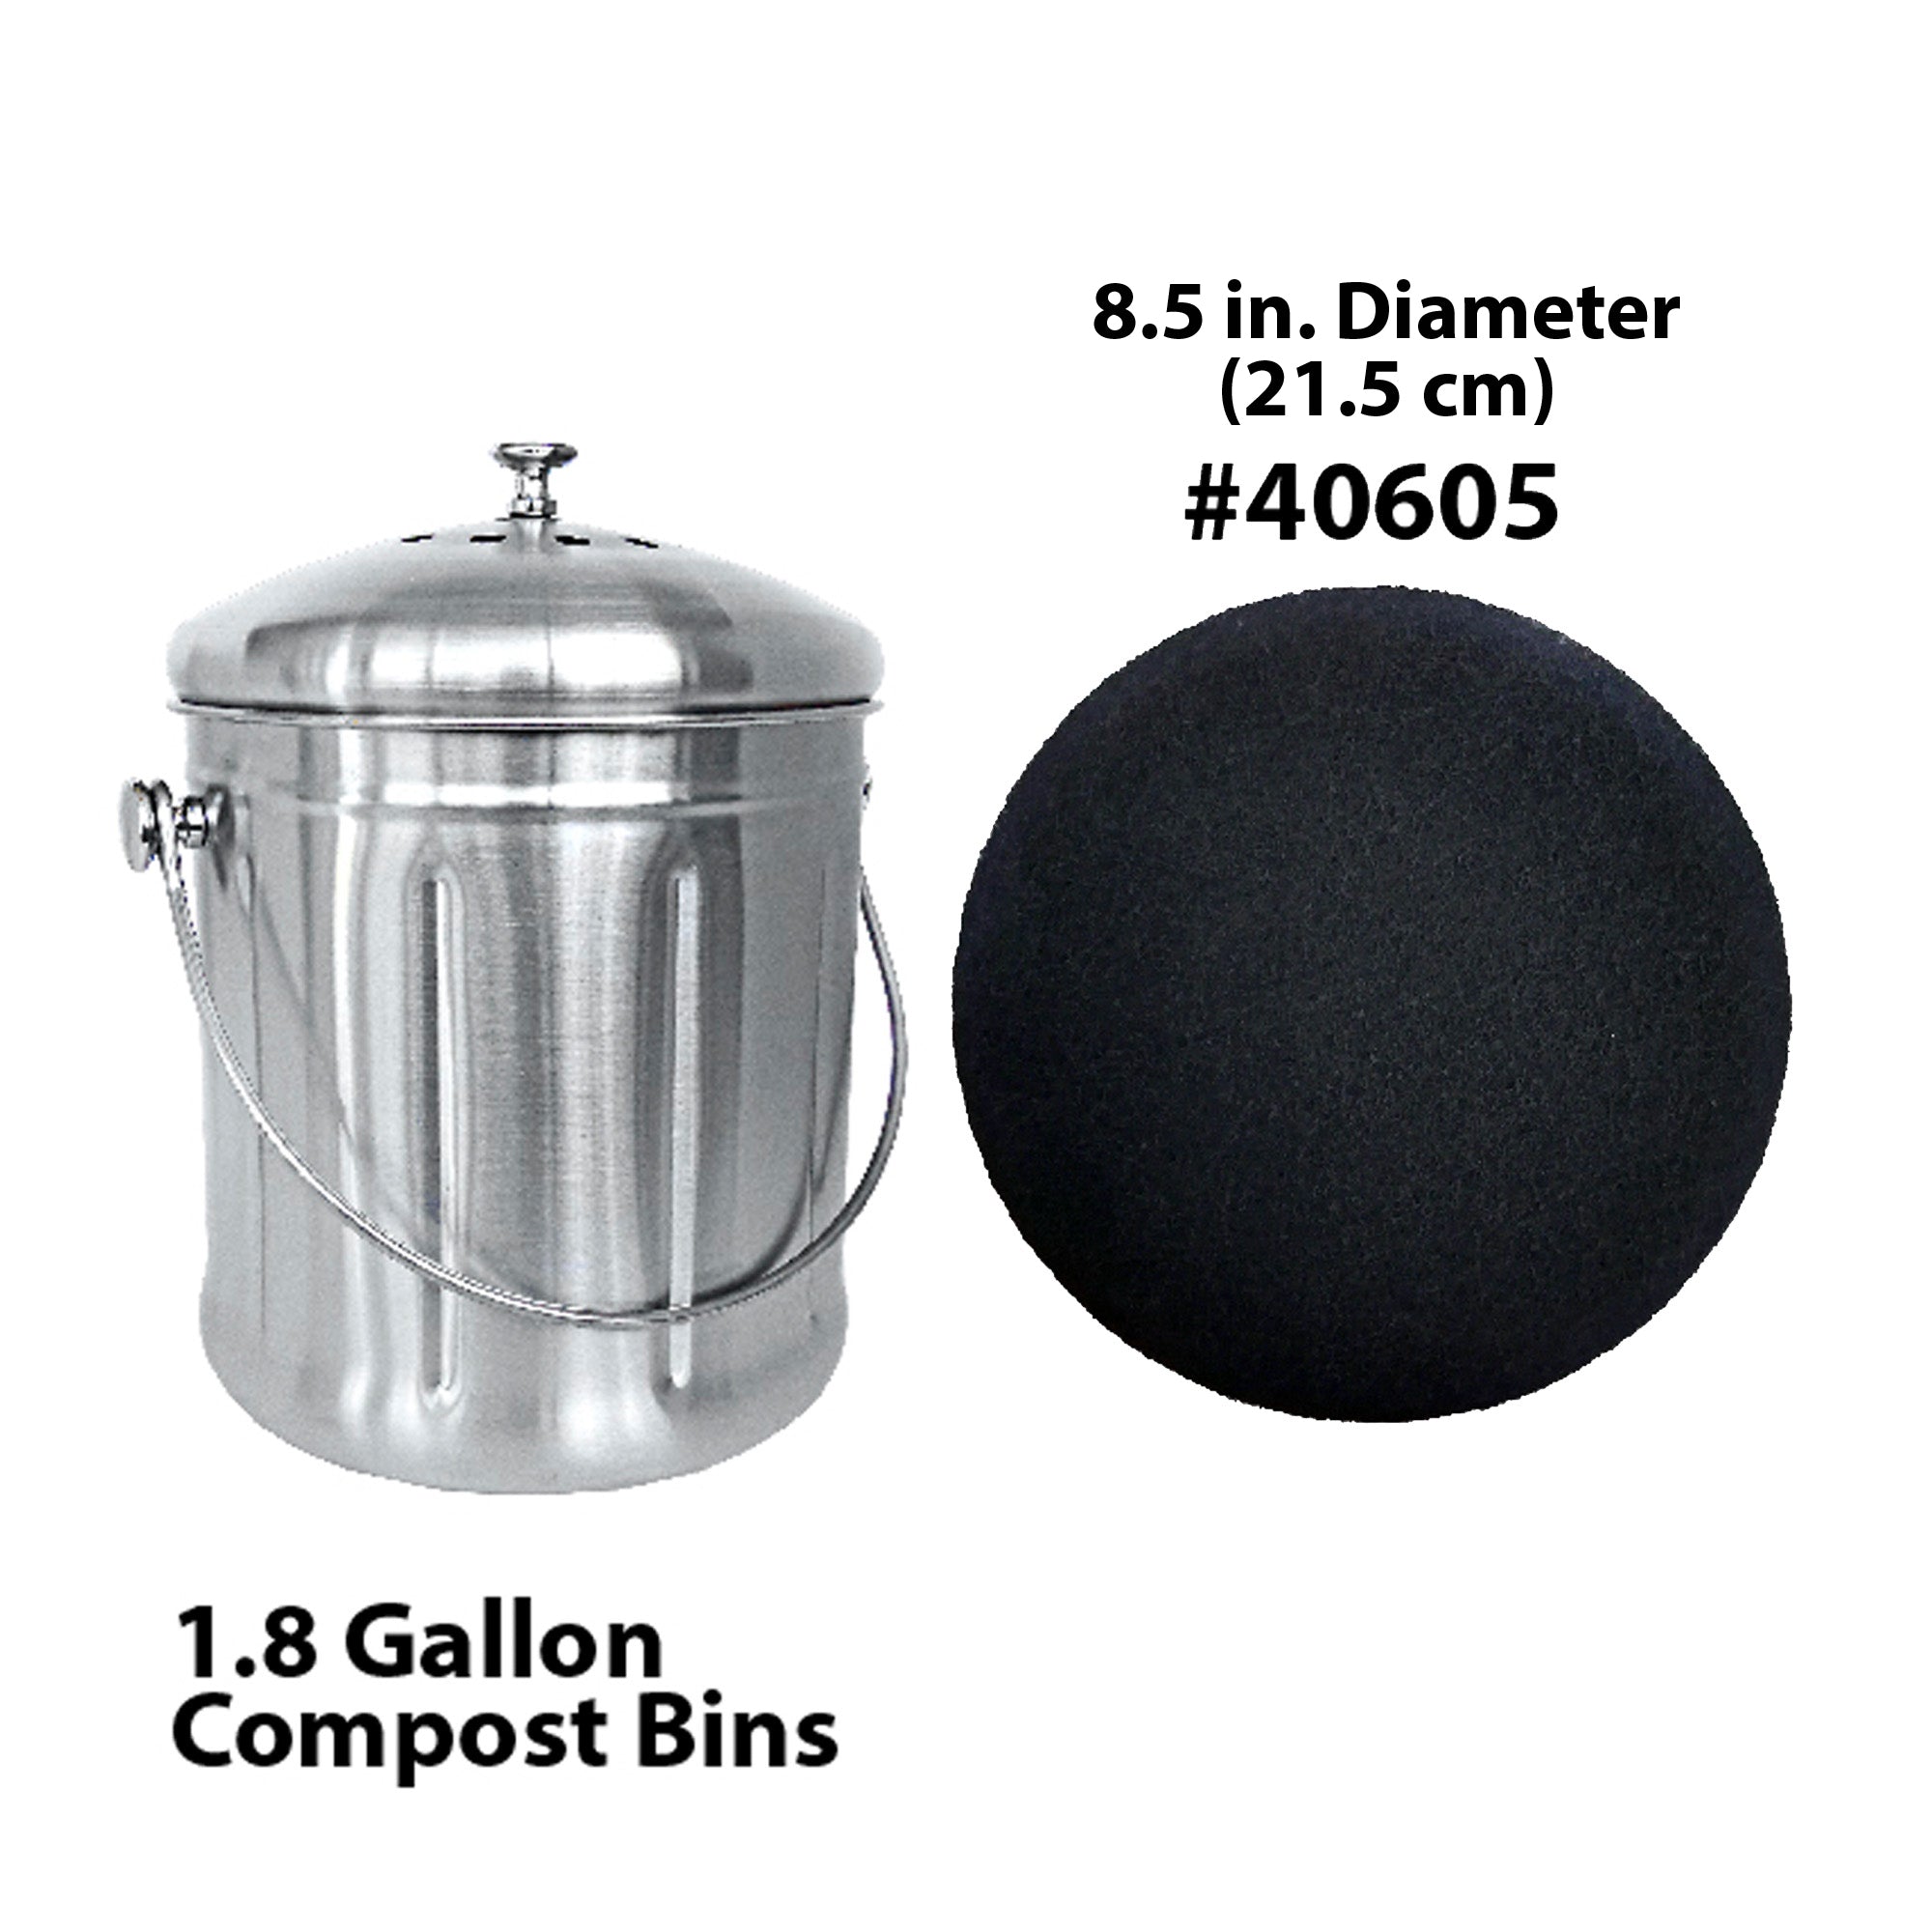 Indoor Compost Bin No Smell, Compost Pail for Kitchen Counter, 1.3 Gal -  Saratoga Home